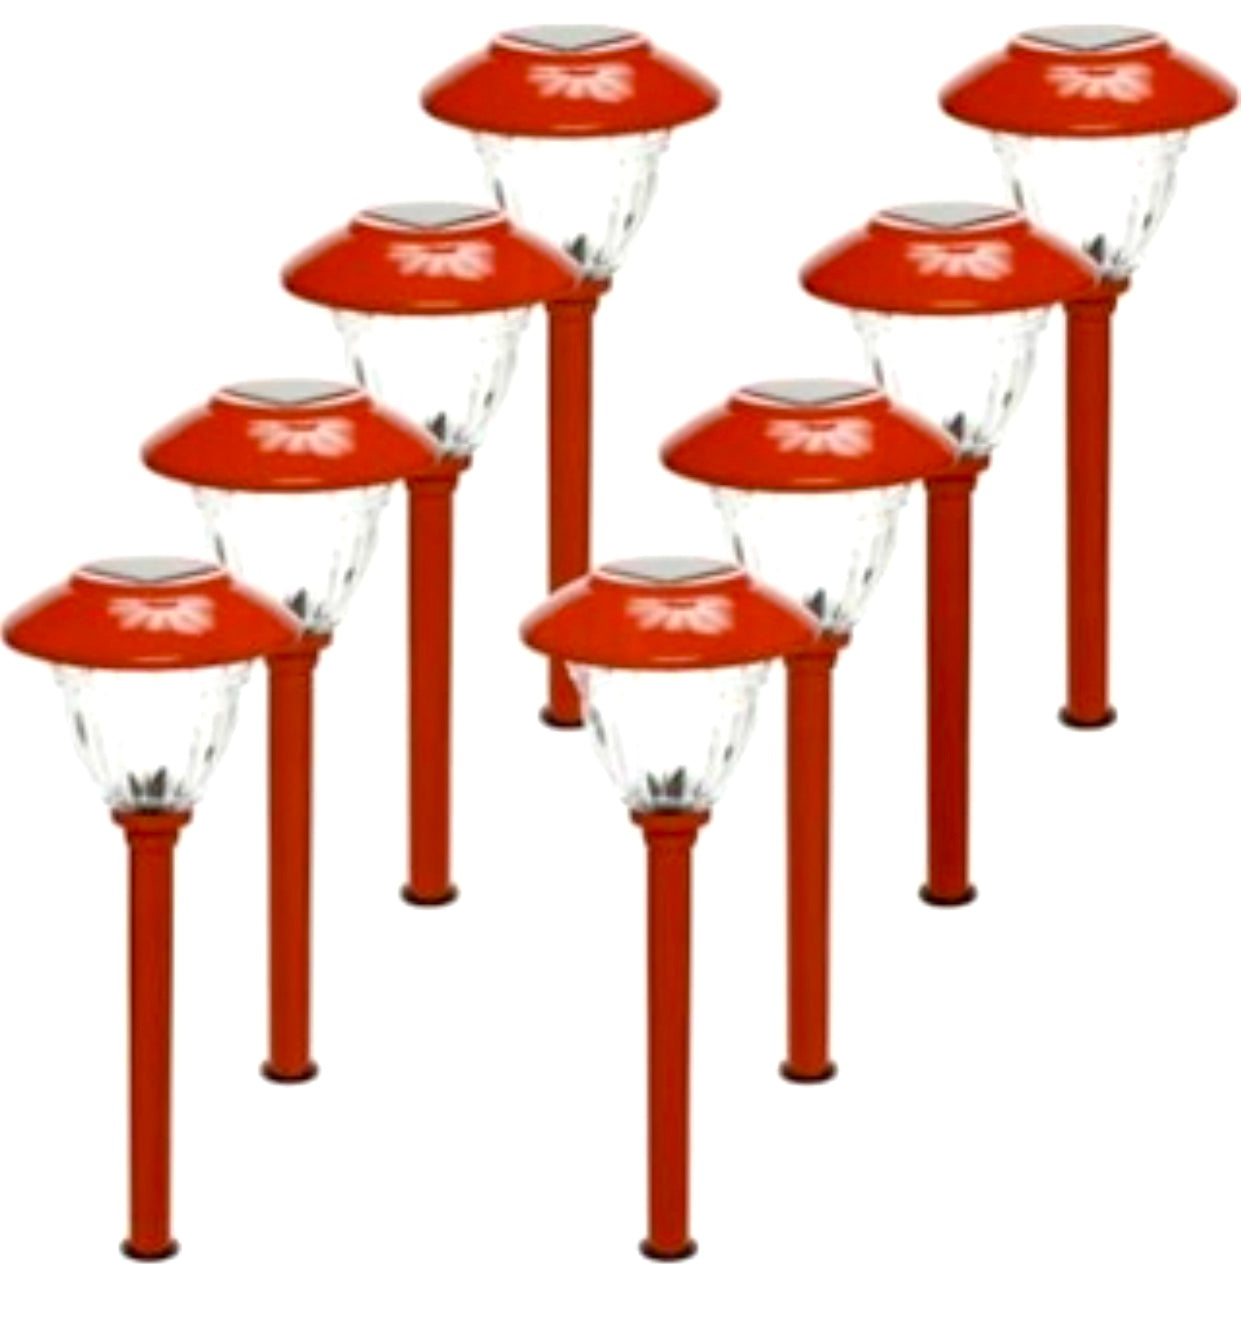 New-LED-Energizer-8-Pack-Solar-Pathway-Lights-Outdoor-Stainless-Steel-Red